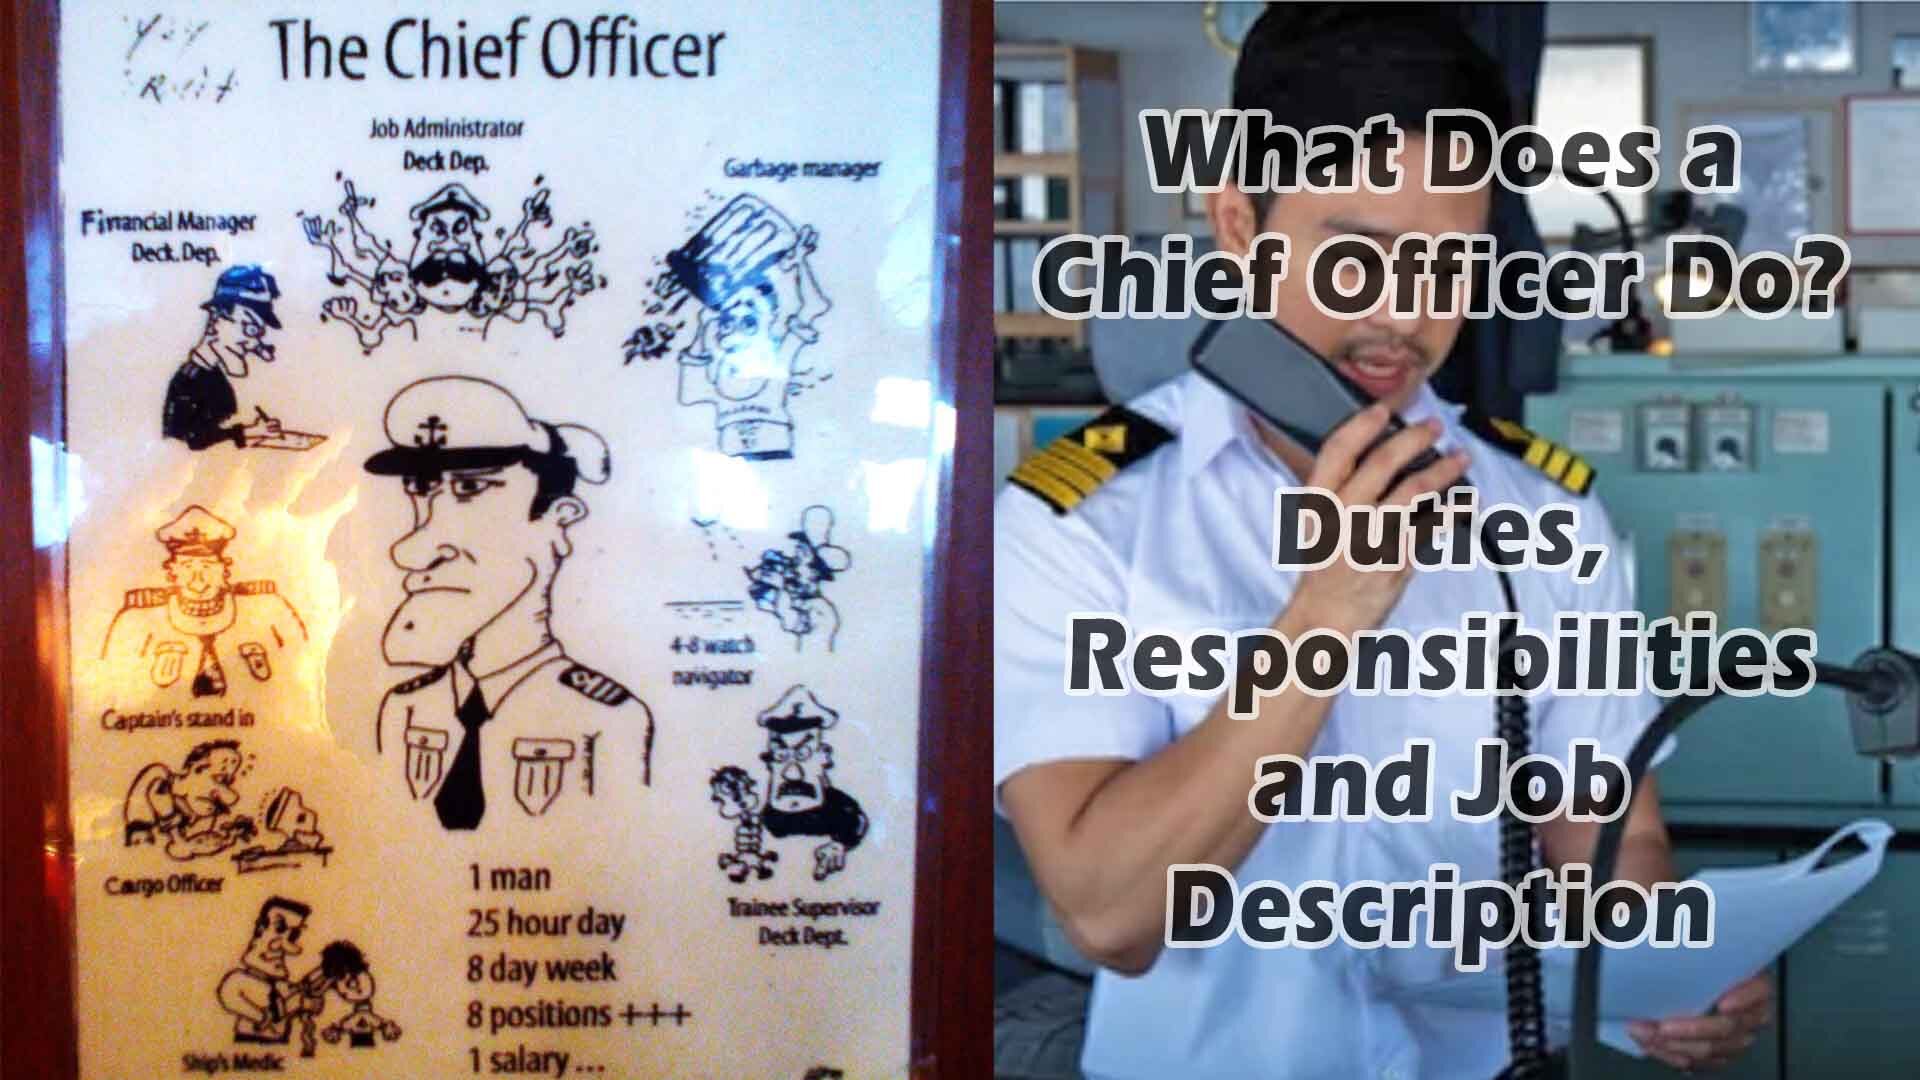 Two images side-by-side: on the left is a caricature of a Chief Mate's duties, and on the right is a Chief Officer calling via VHF radio.